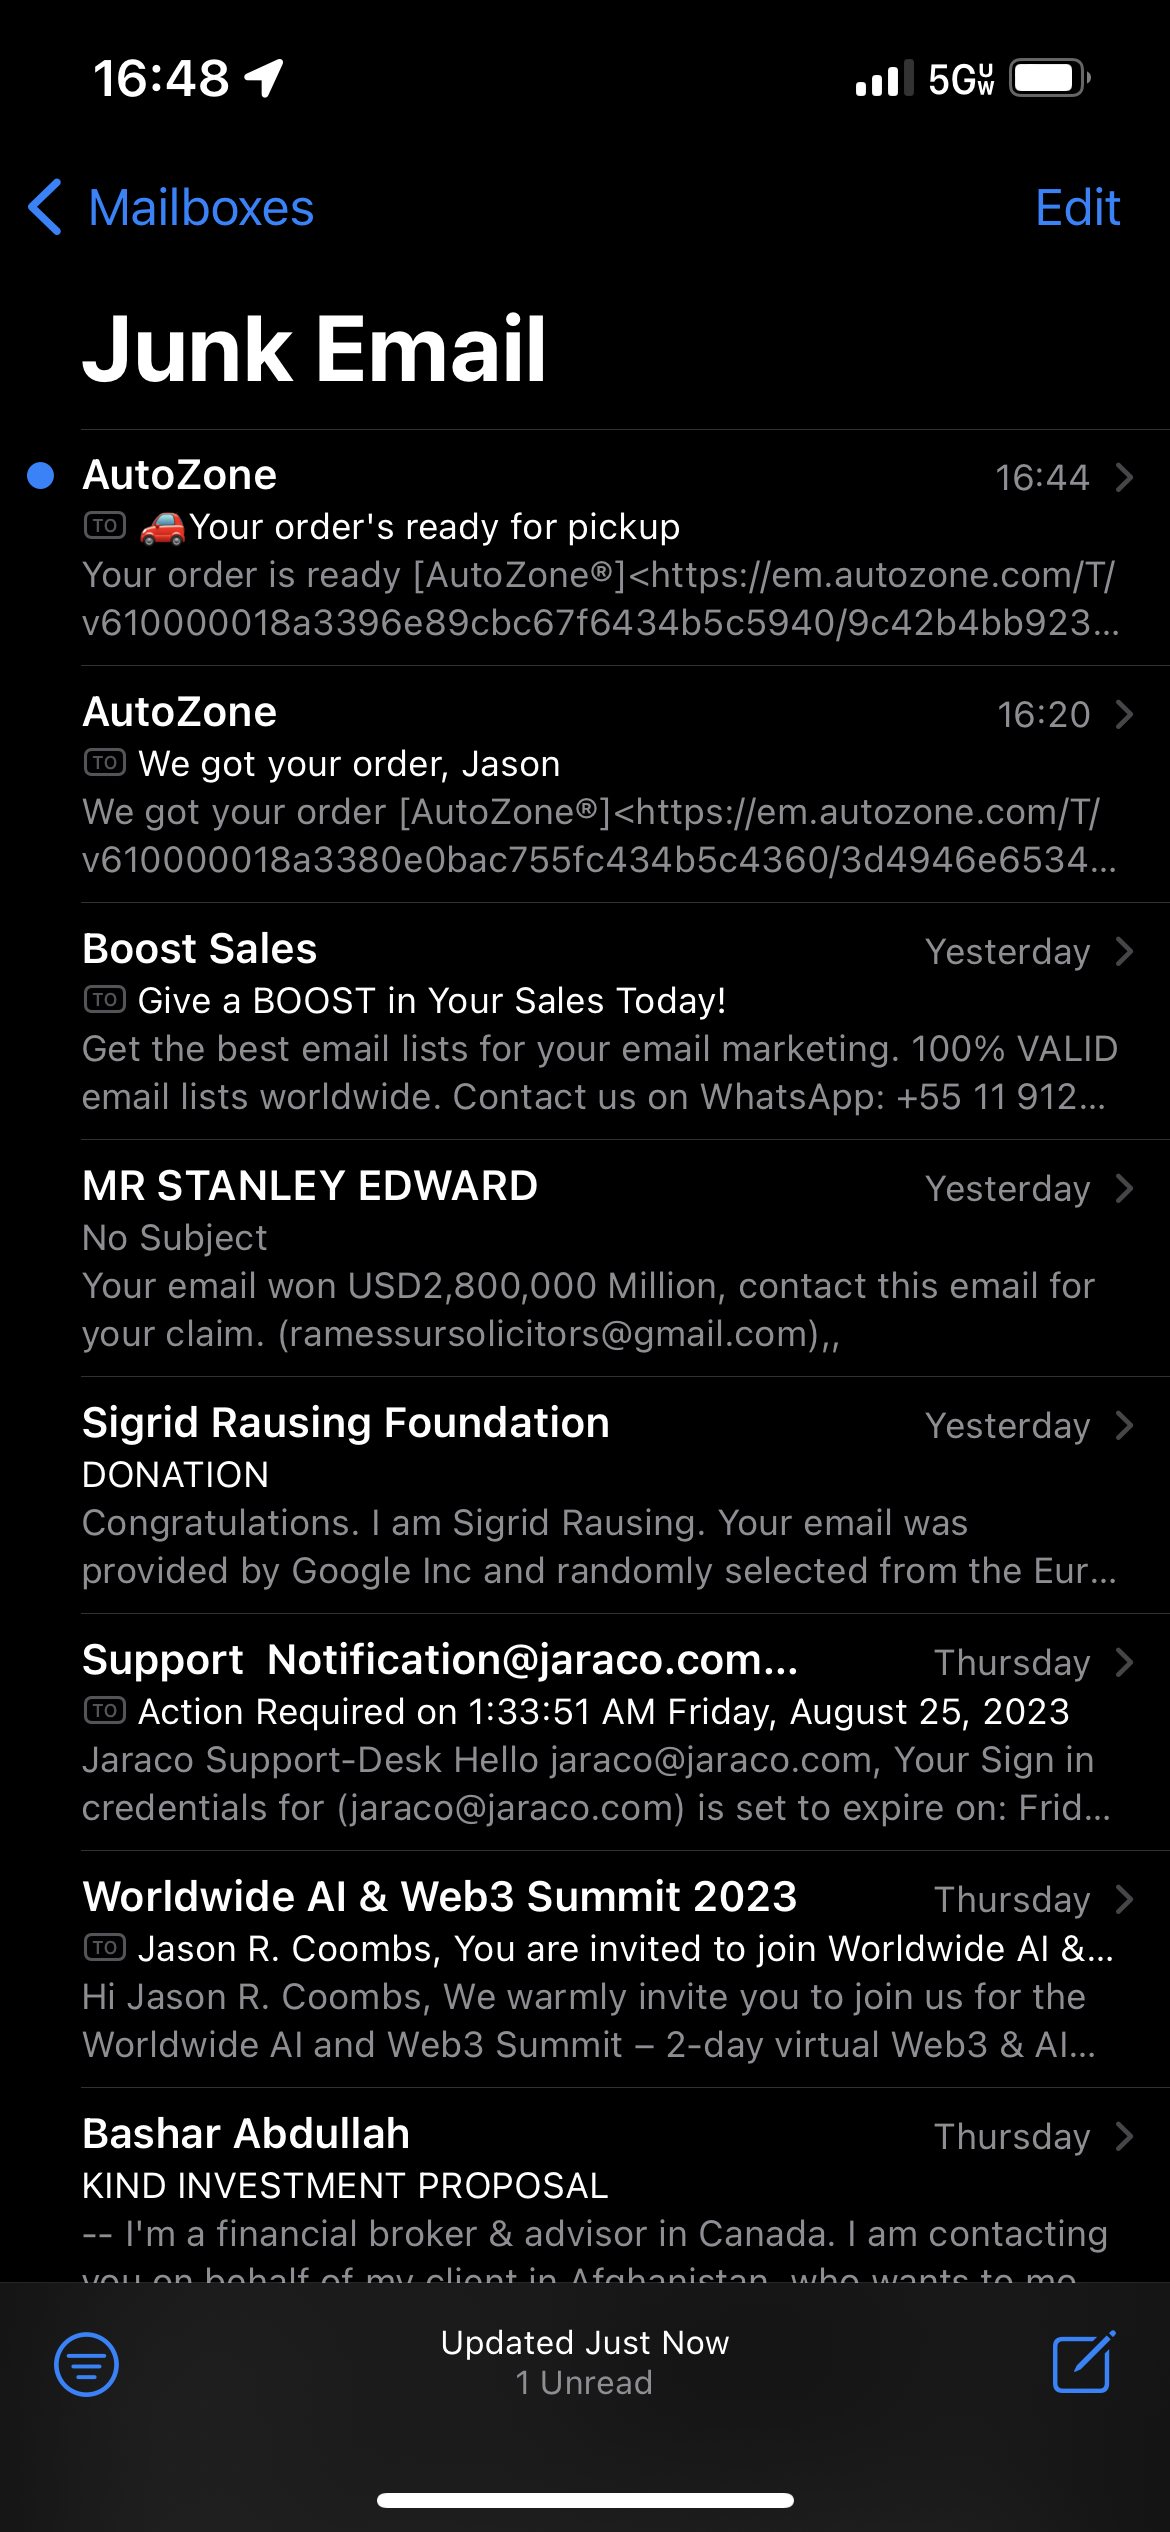 Autozone messages in Junk Email